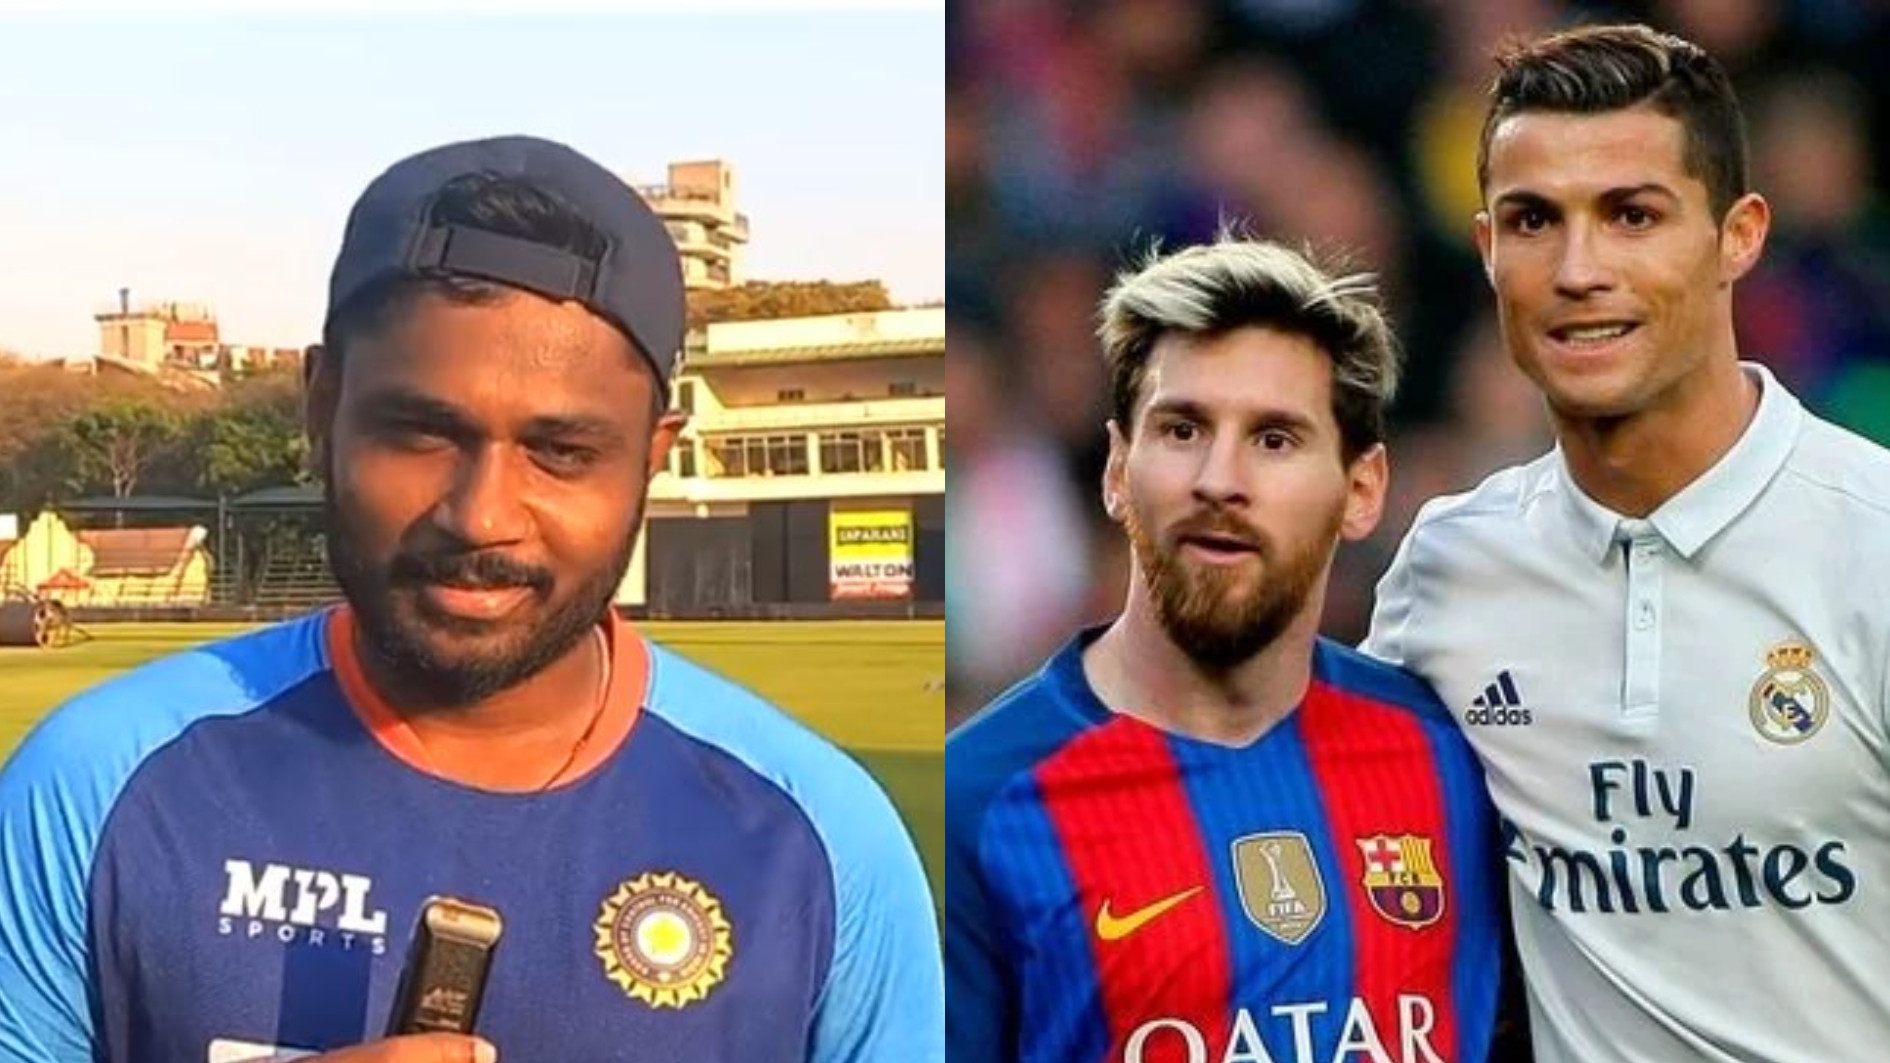 ZIM v IND 2022: WATCH- Messi or Ronaldo? Favorite sports personality- Sanju Samson answers some tricky questions